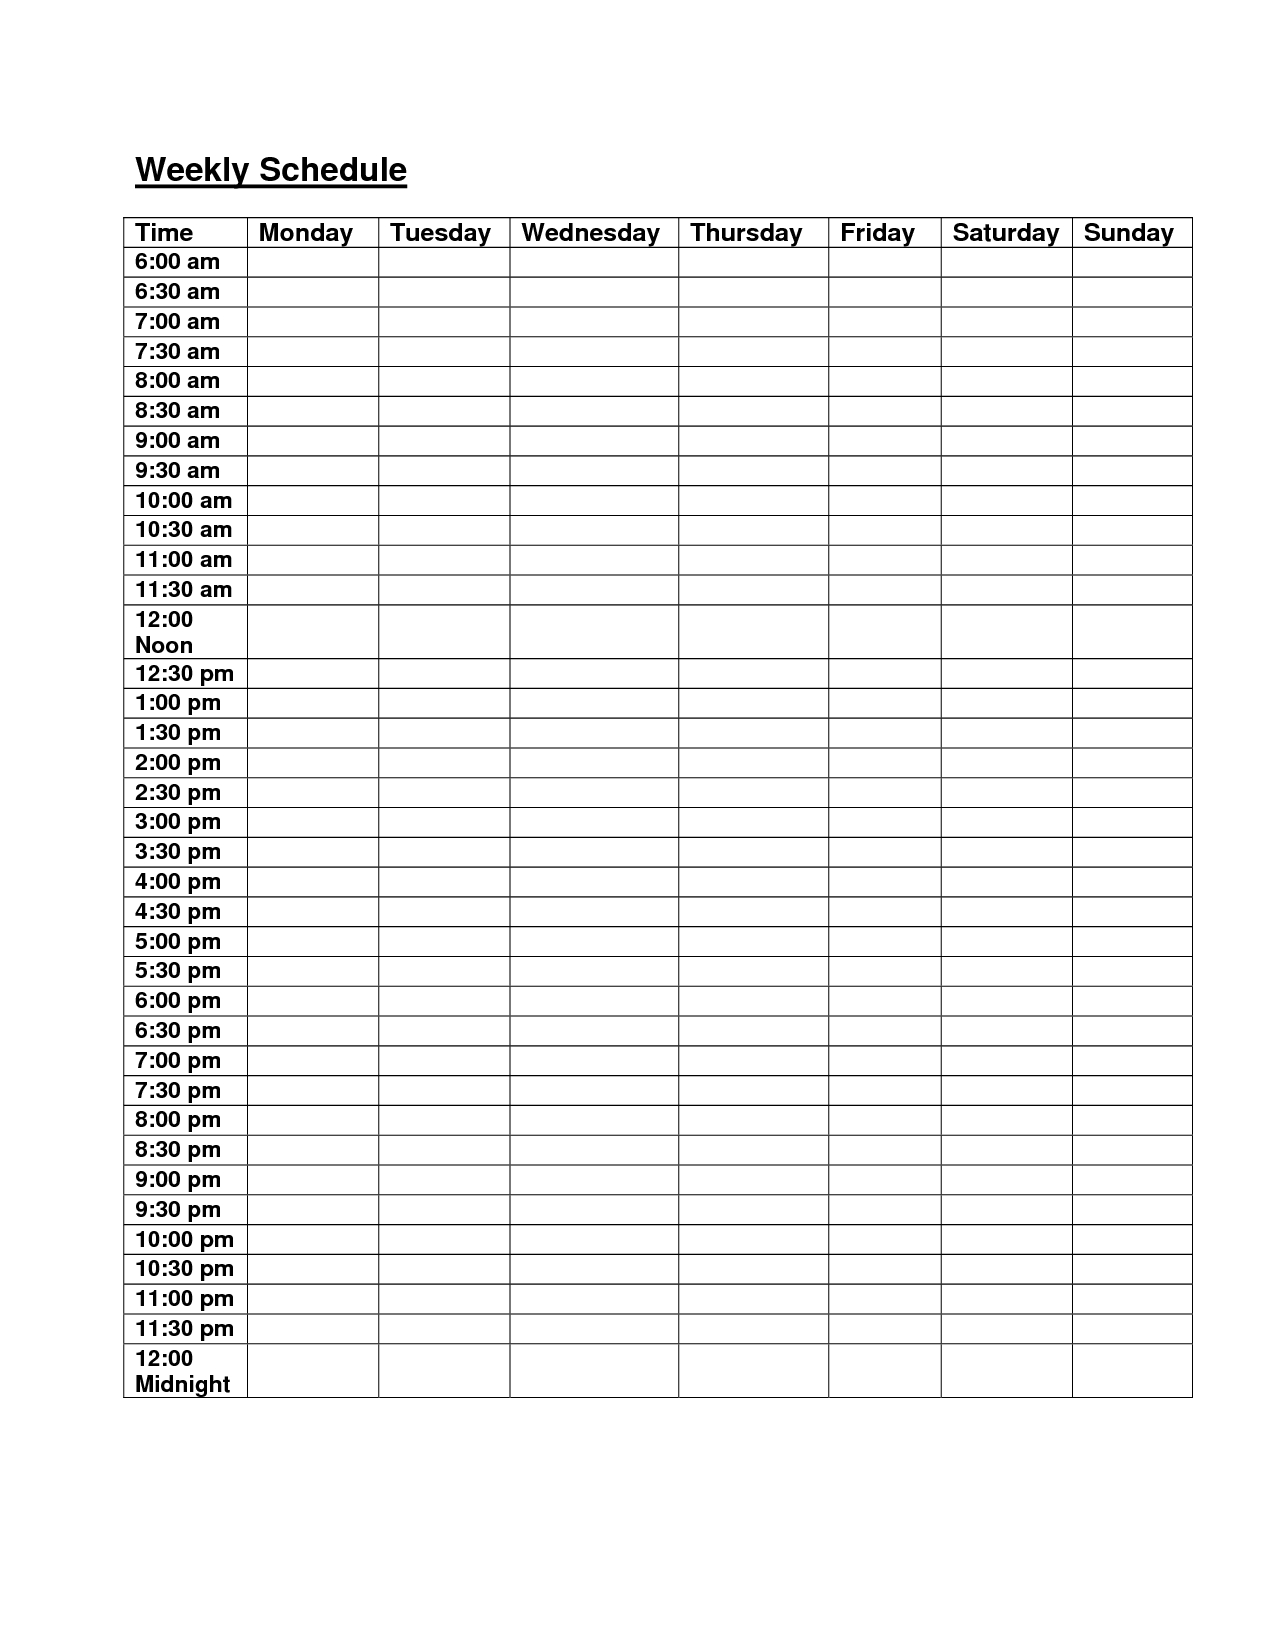 6Am Midnight Hourly Weekly Schedule Planner | Daily pertaining to Hourly Week Calendar